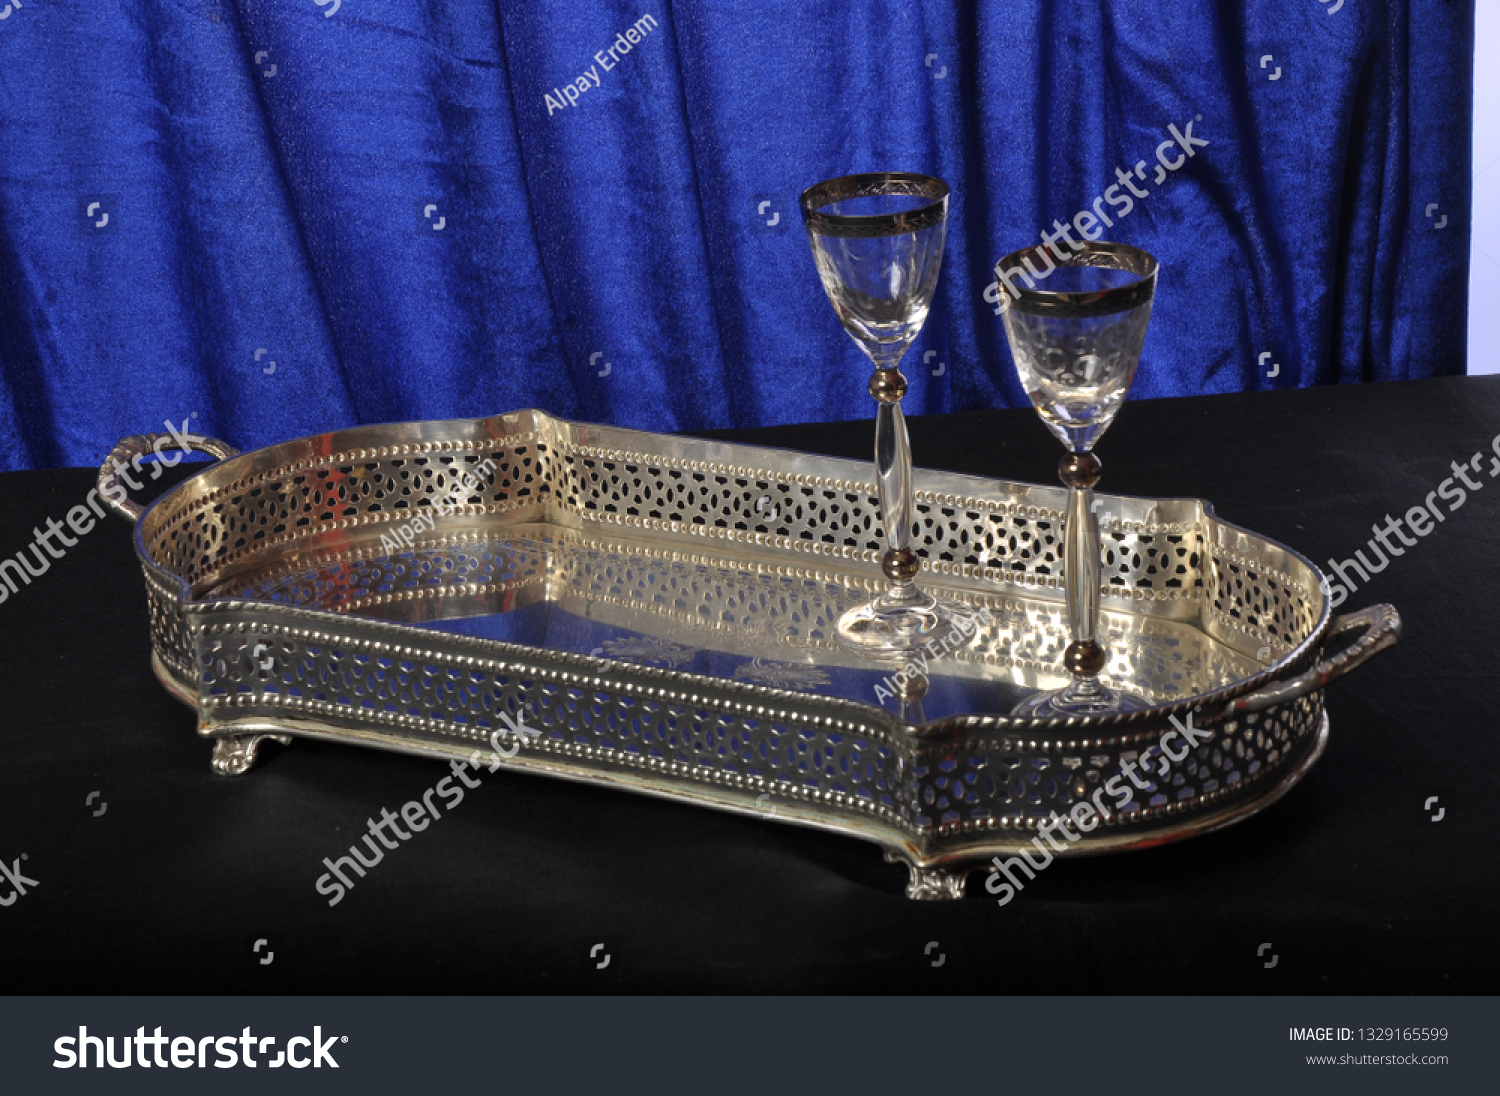 Silver salver on a blue background with 2 wine glasses #1329165599